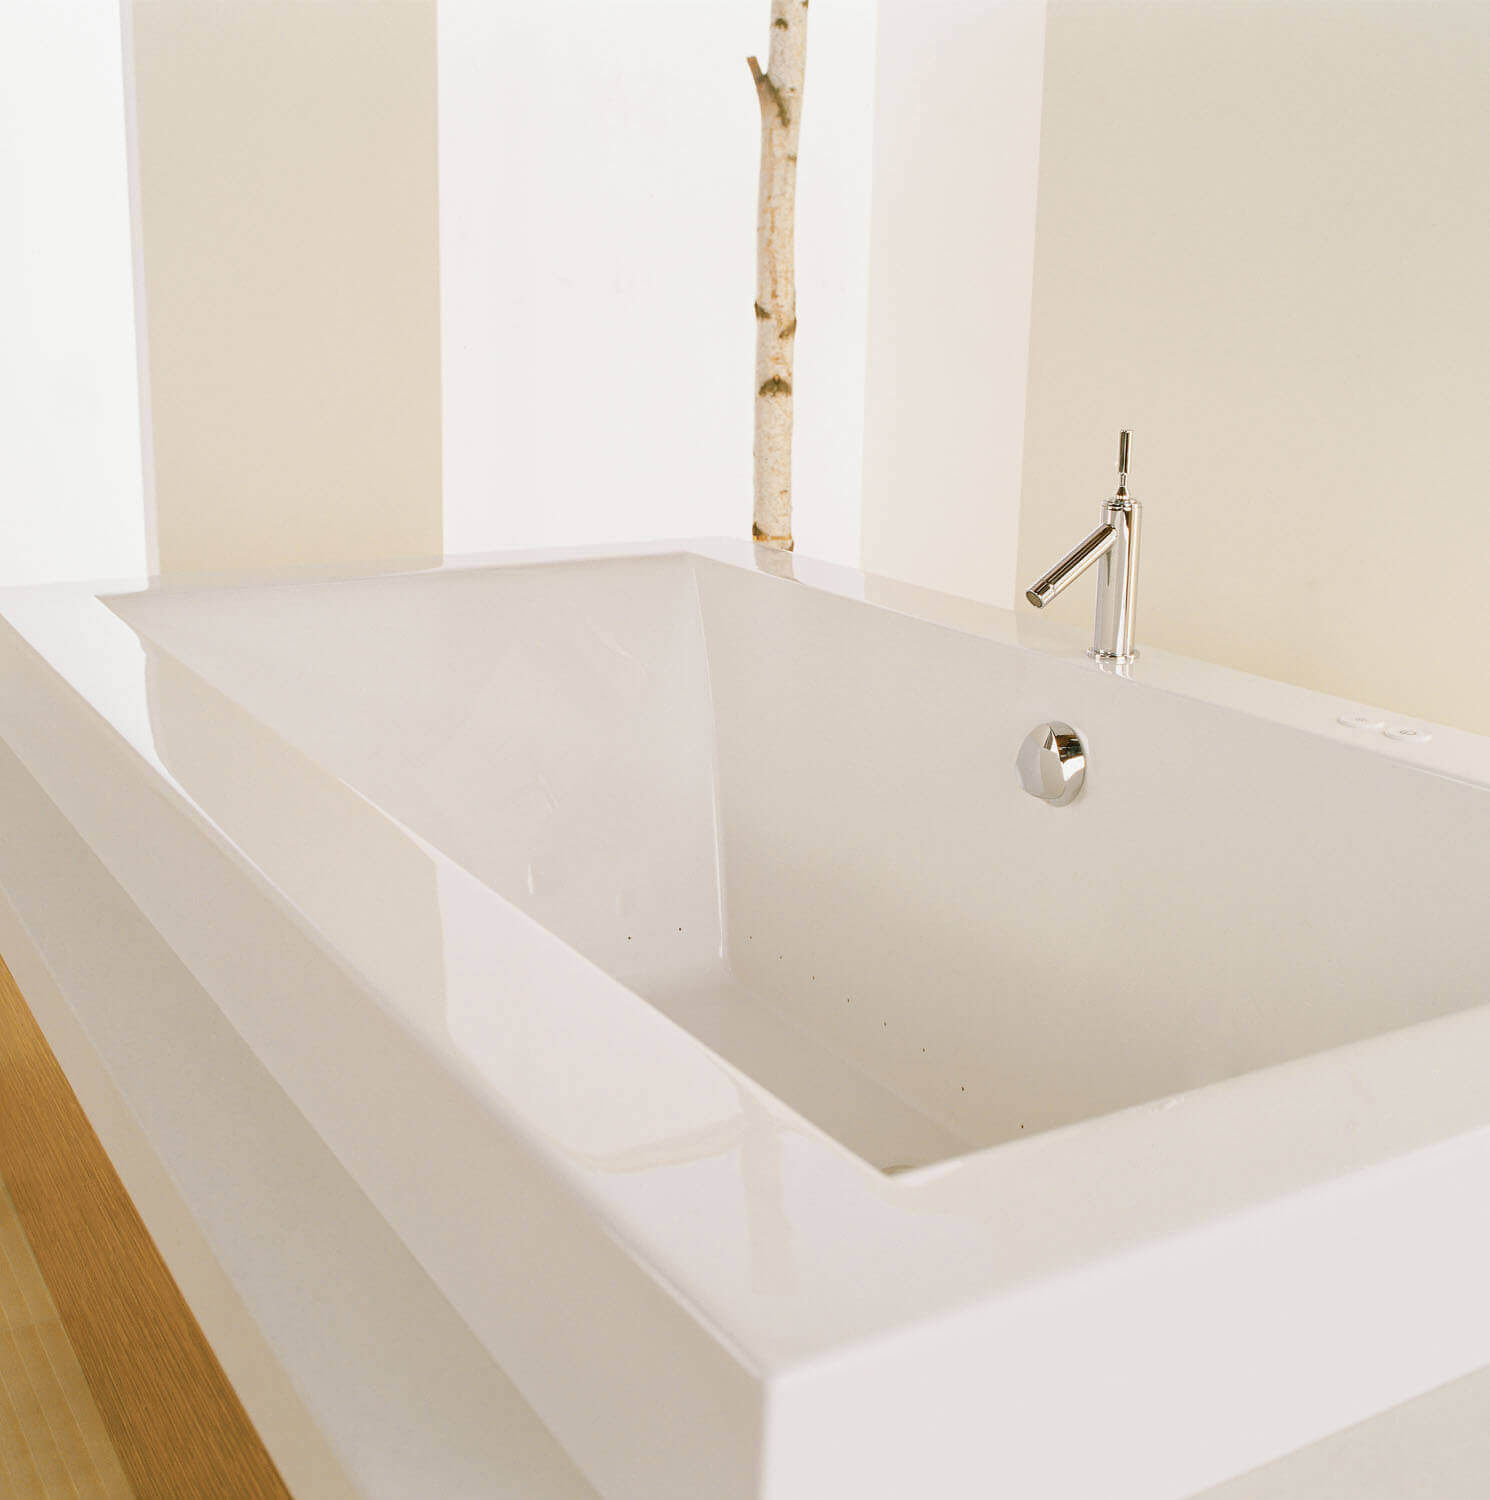 Bainultra Origami® 7236 Original Series two person large air jet bathtub for your modern bathroom